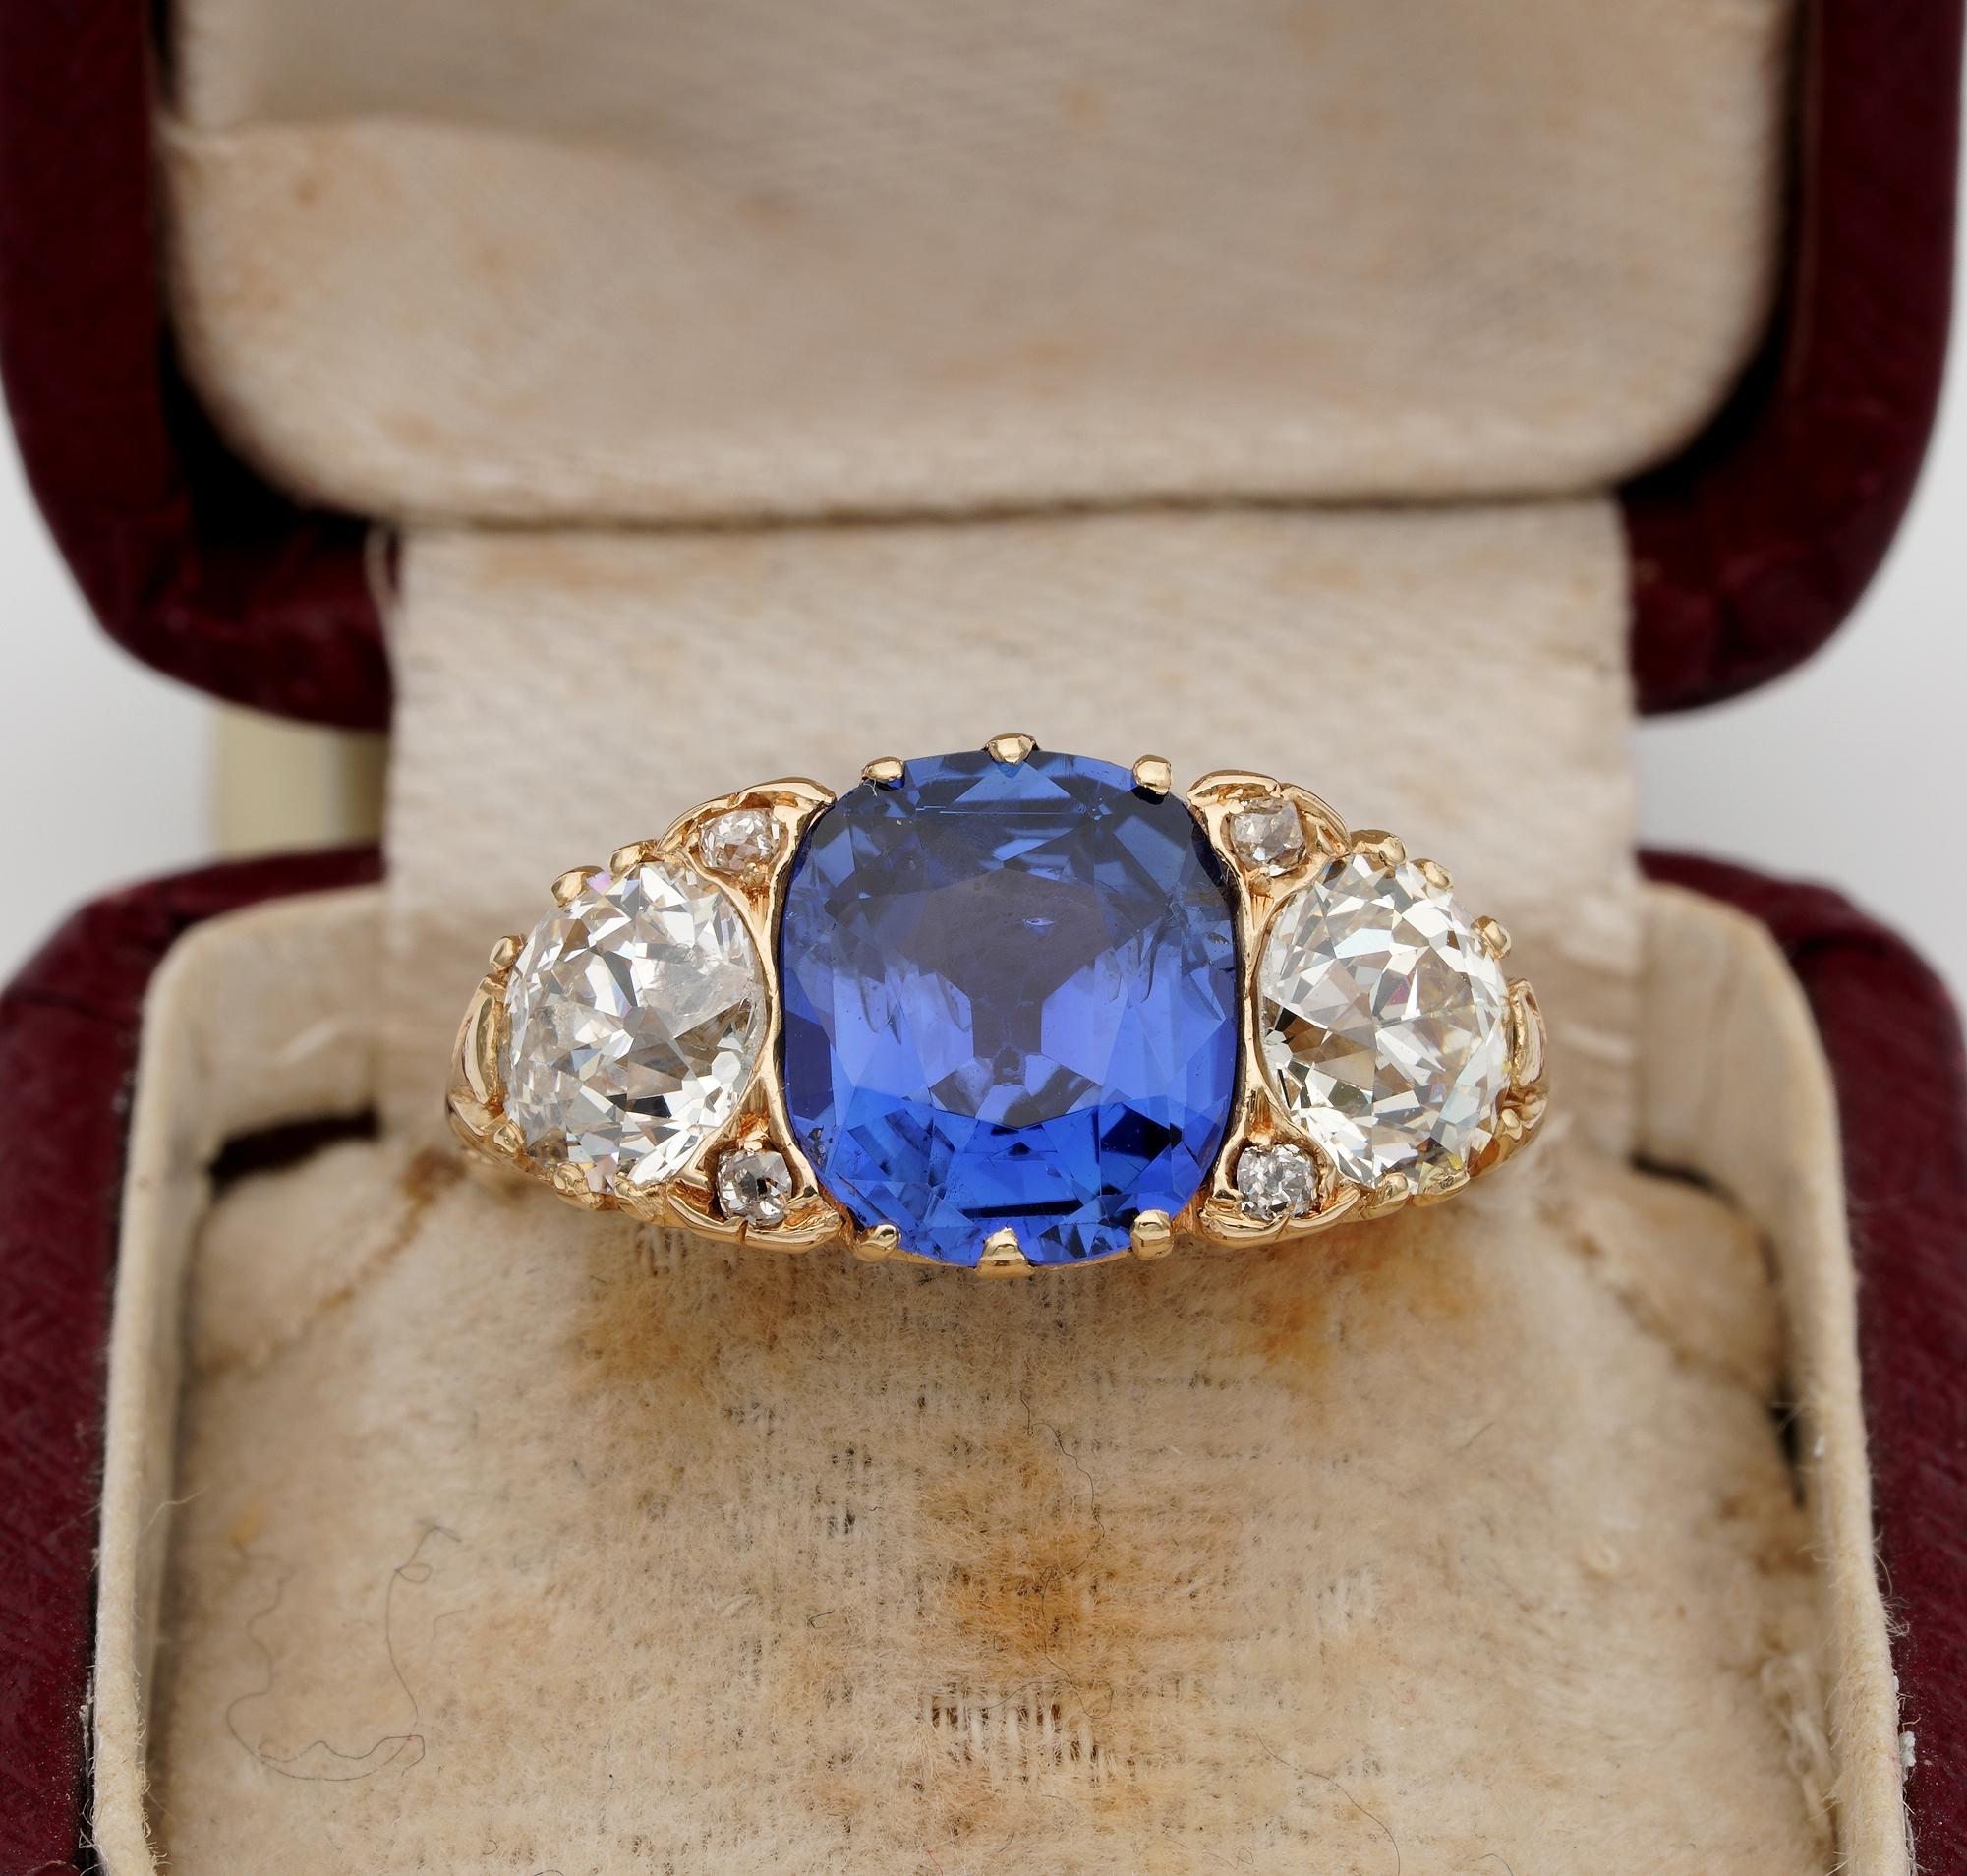 History on a Hand
Getting hold of durable values along with rare antiques for sure is building up your heirloom pieces for now and the future
This magnificent Edwardian period ring is a fantastic opportunity to acquire one of the finest trilogy ring